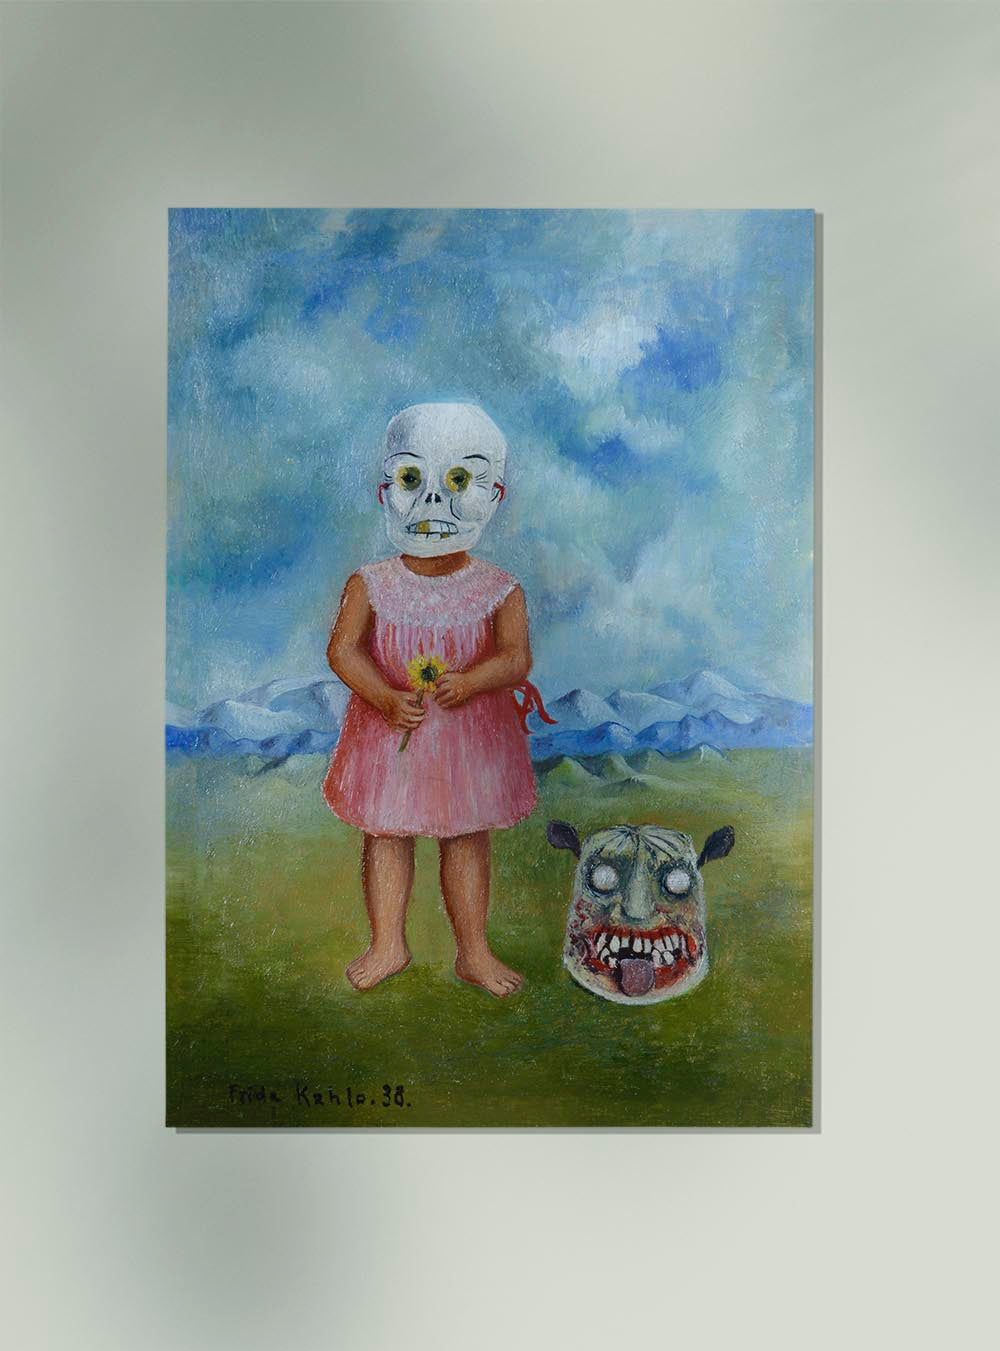 Girl with a Death Mask Art Print by Frida Kahlo